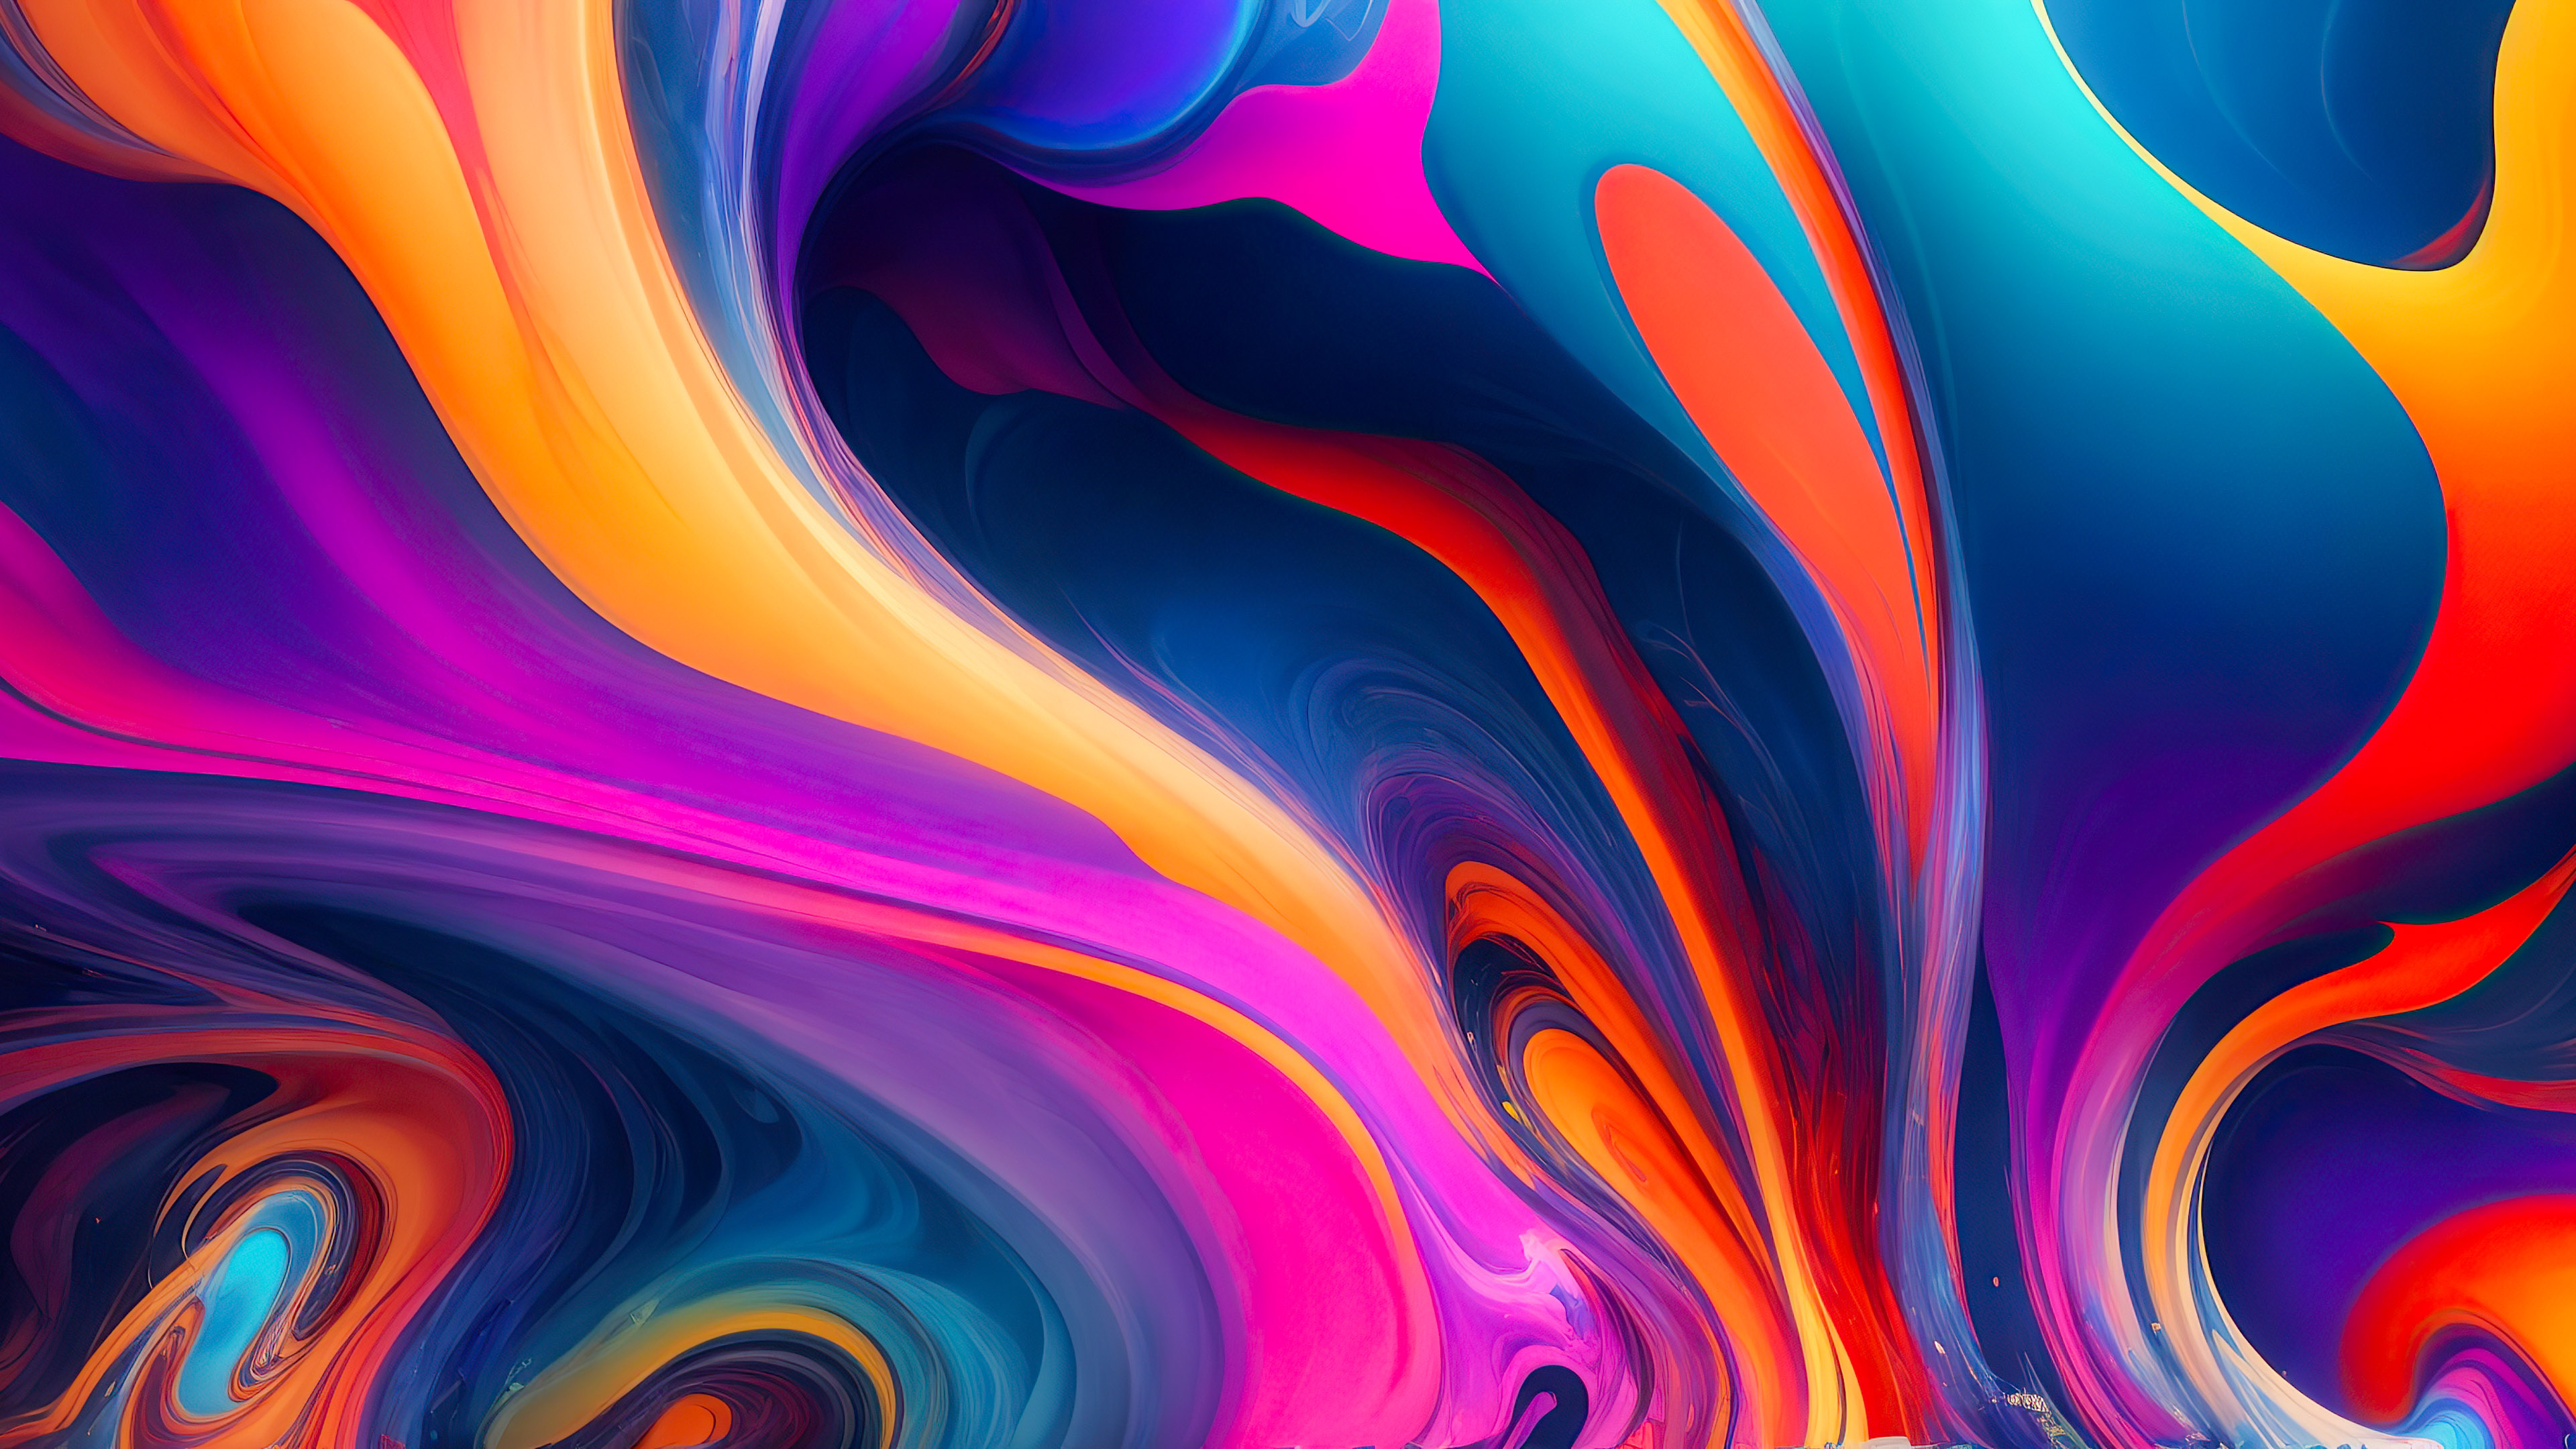 Immerse yourself in the vibrant world of creativity with our colorful abstract art wallpaper, featuring complex work and a sense of chaos and spiritualism.